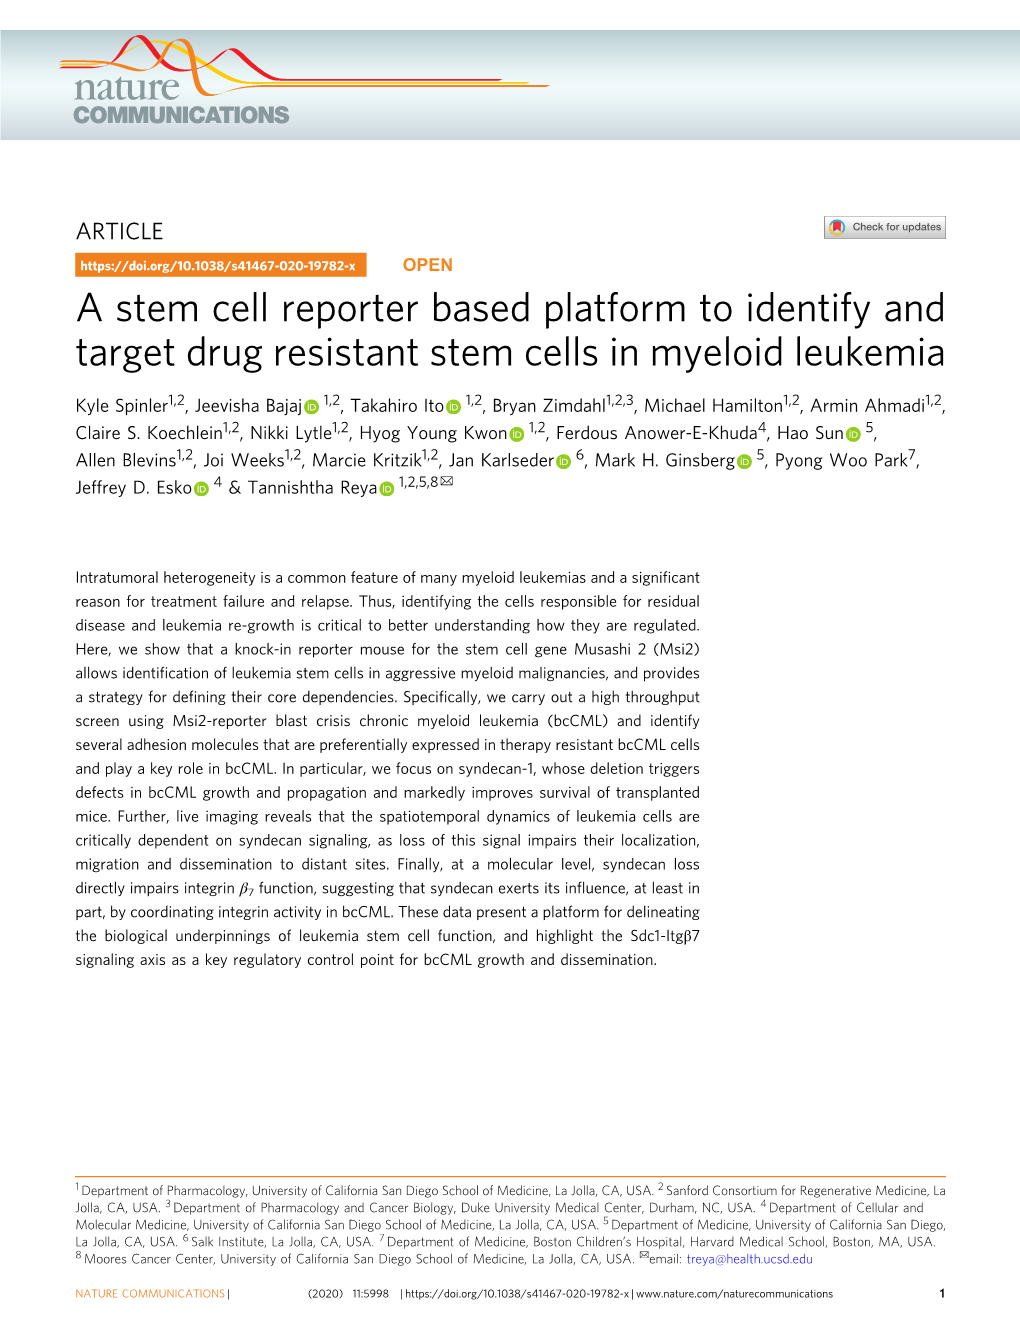 A Stem Cell Reporter Based Platform to Identify and Target Drug Resistant Stem Cells in Myeloid Leukemia